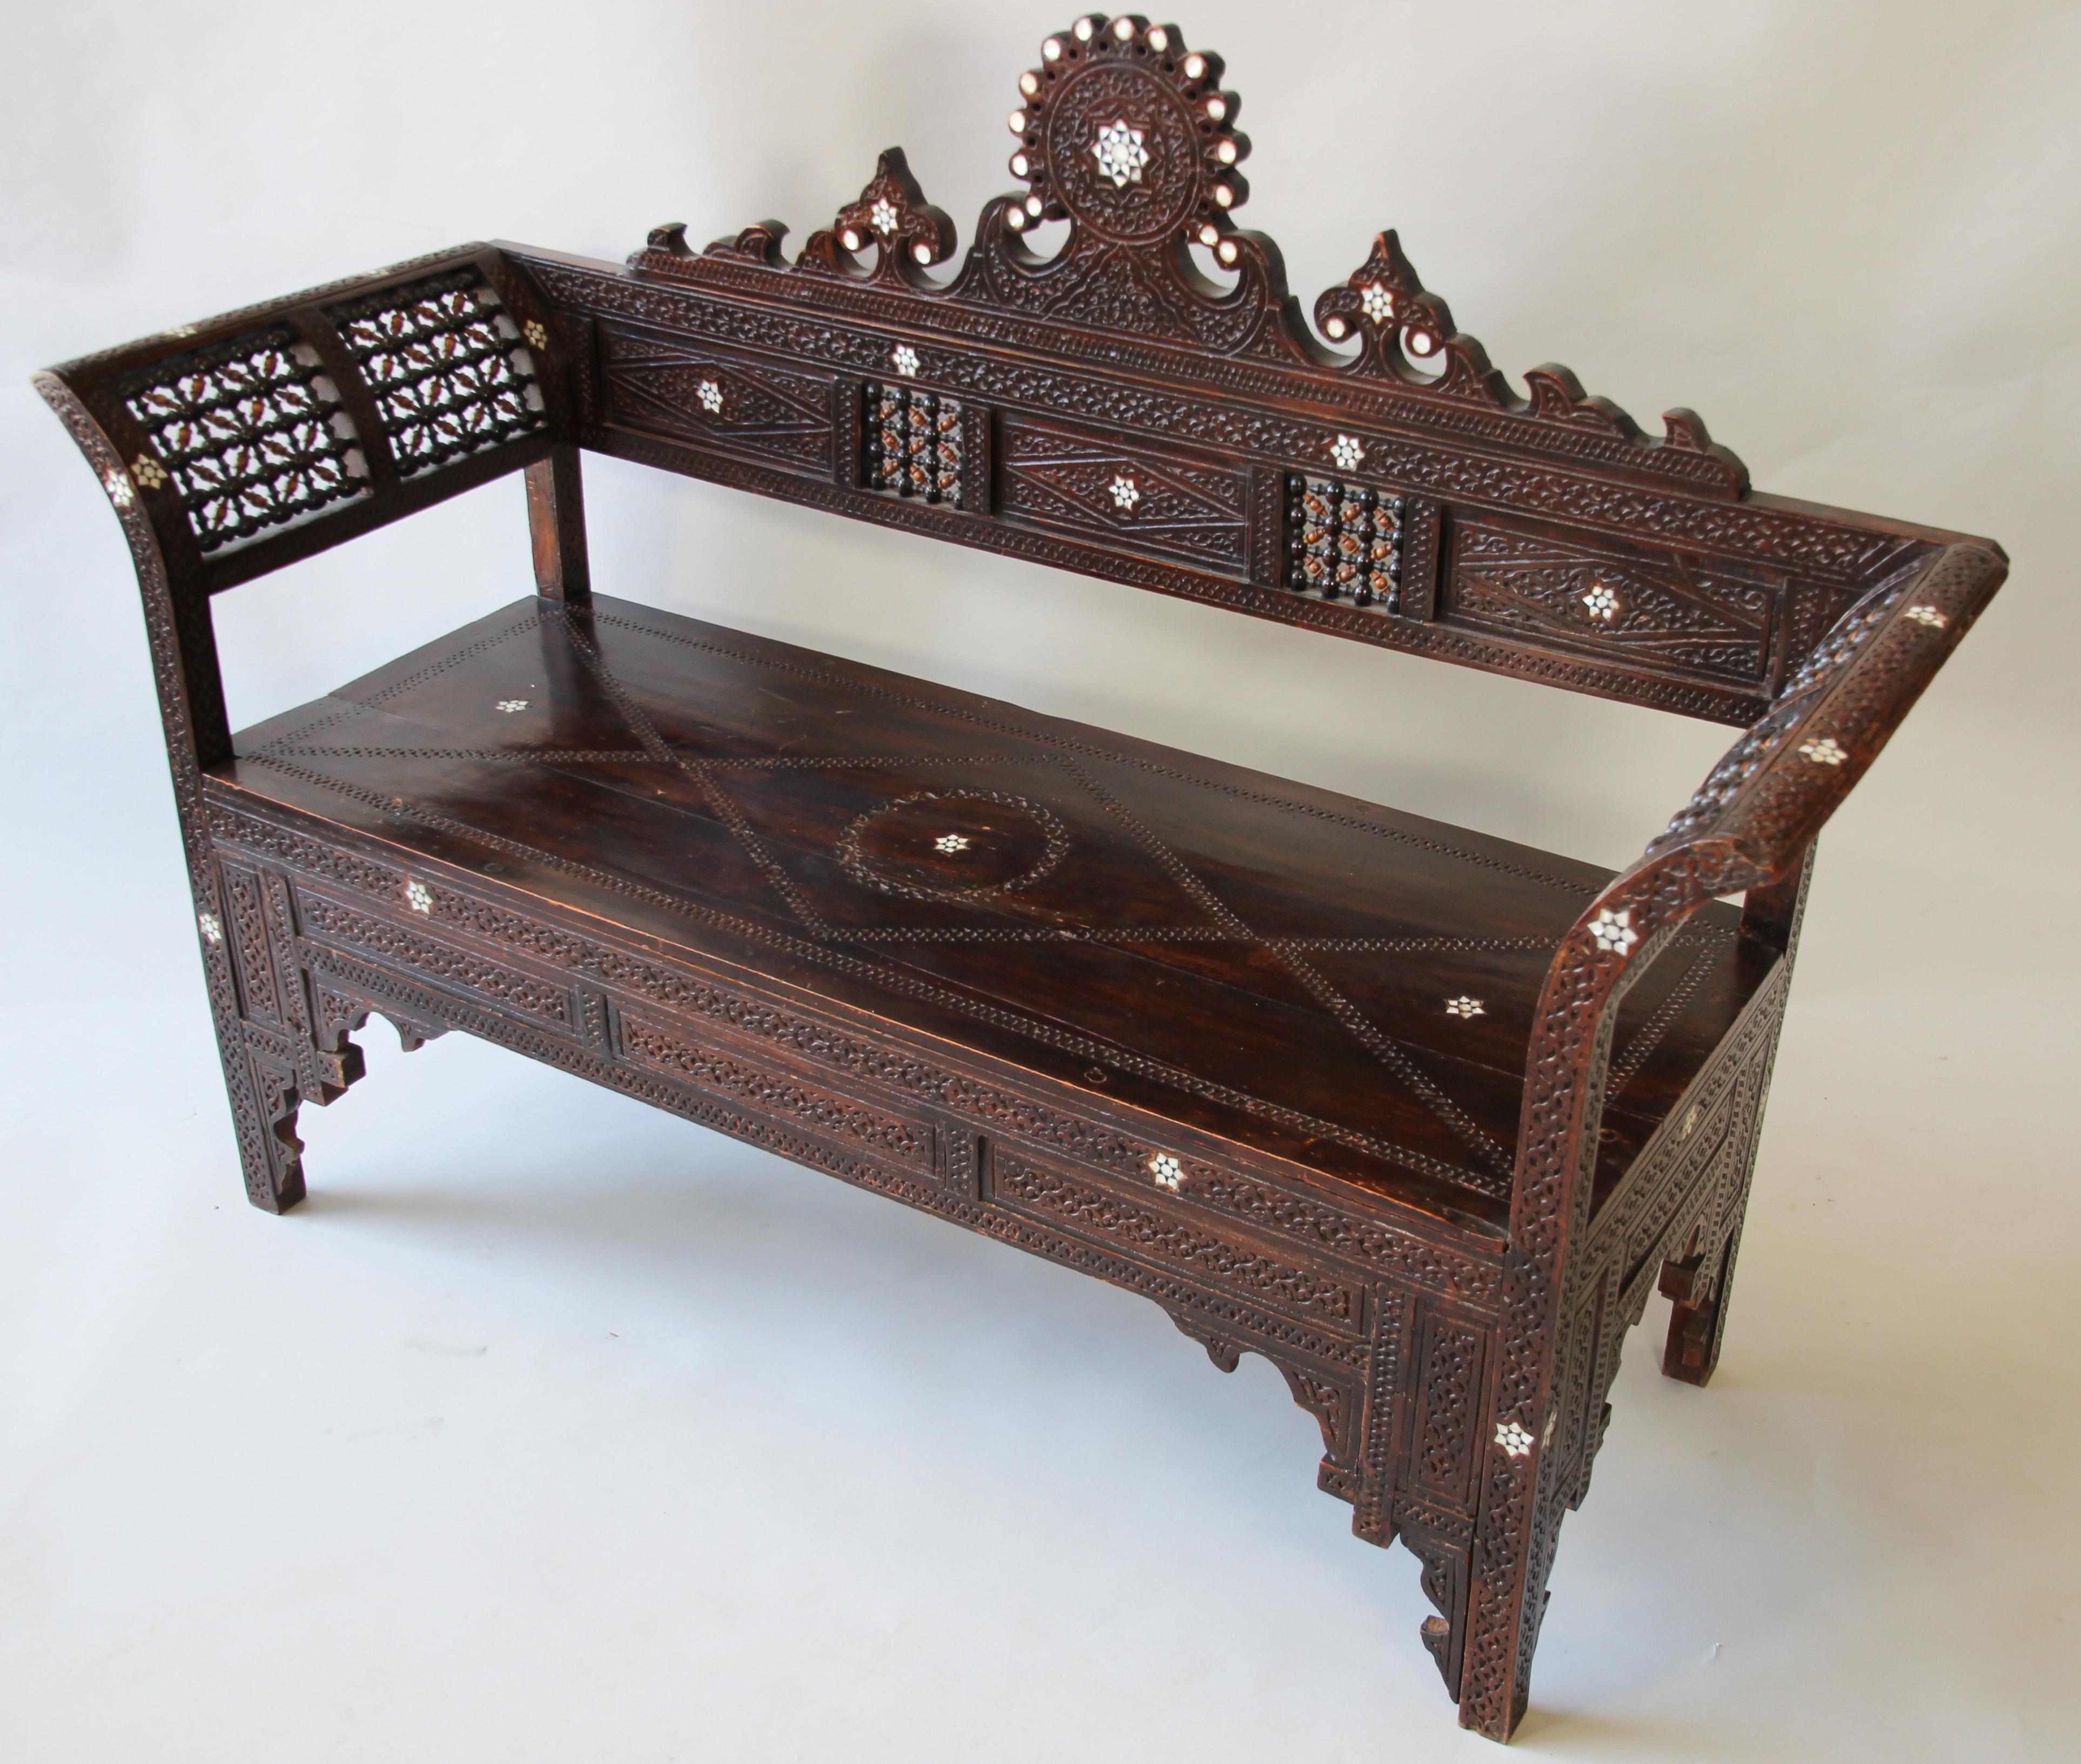 Antique 19th century Syrian Moorish Middle Eastern Arabian finely hand carved and inlaid with mother of pearl.
Nice moucharabie designs all-over the chair.
Syrian Damascene hand carved walnut wood inlaid with mother of pearl stars designs, hand